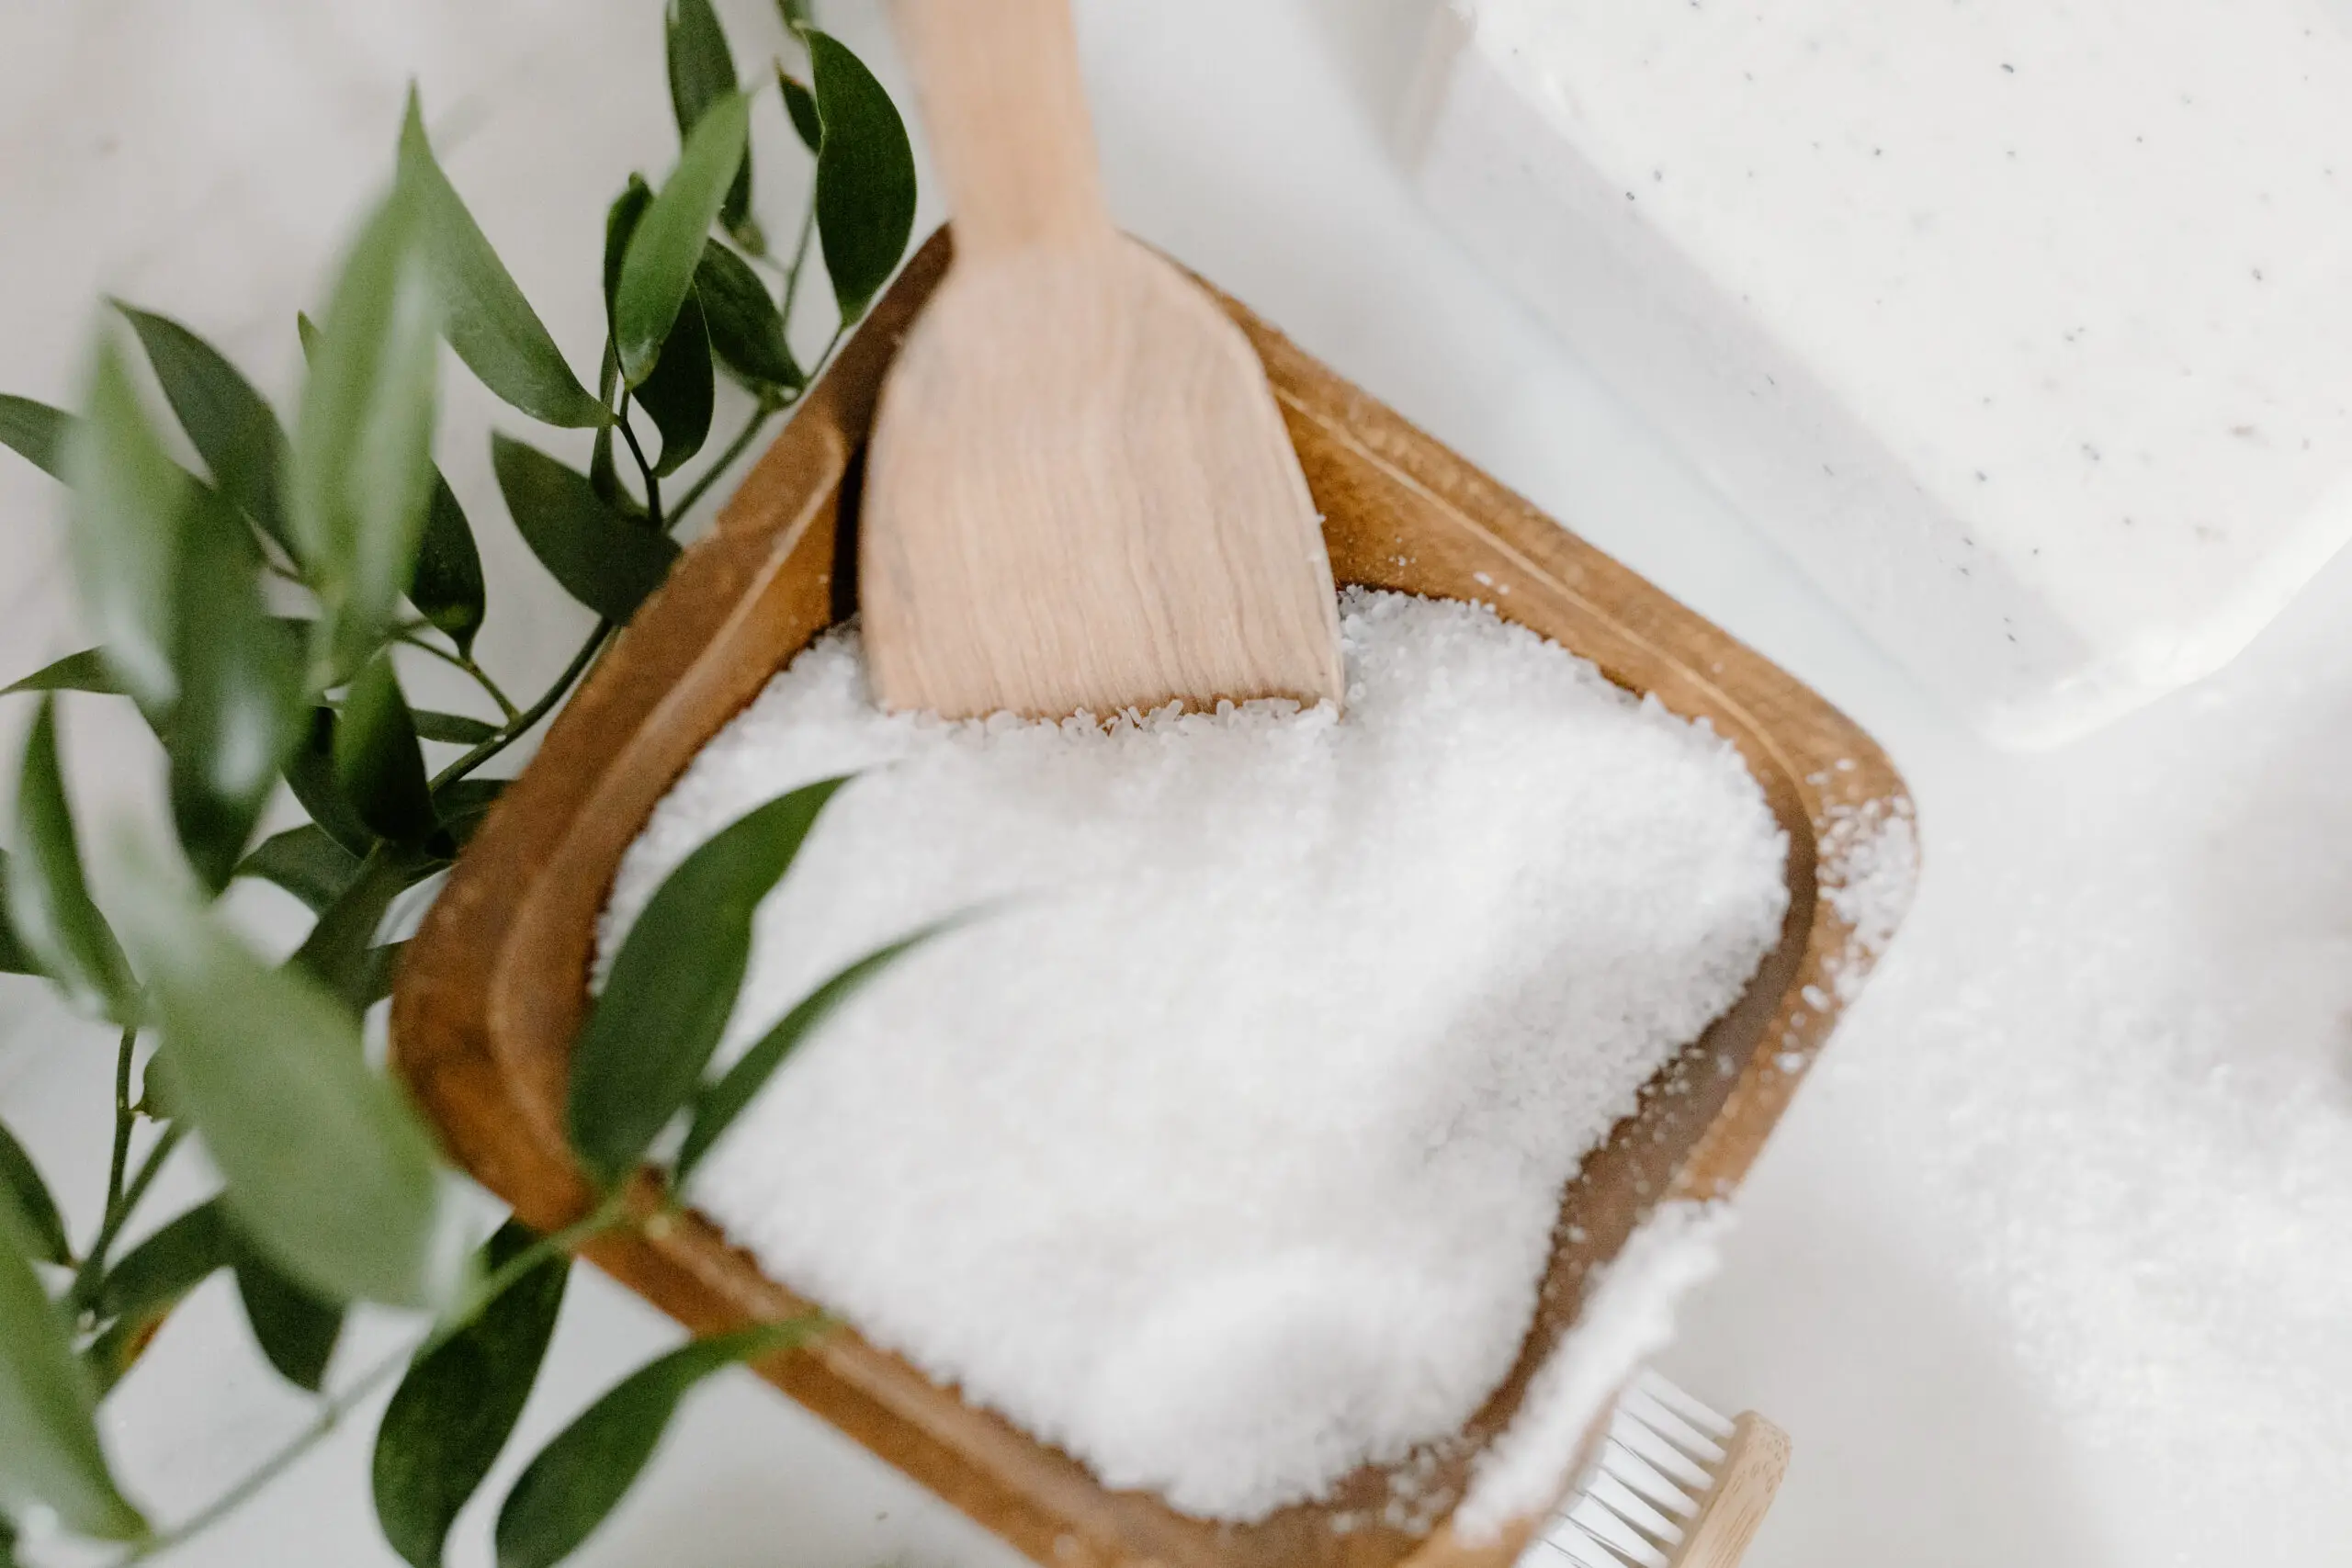 Salt on a wooden bowl to cleanse items